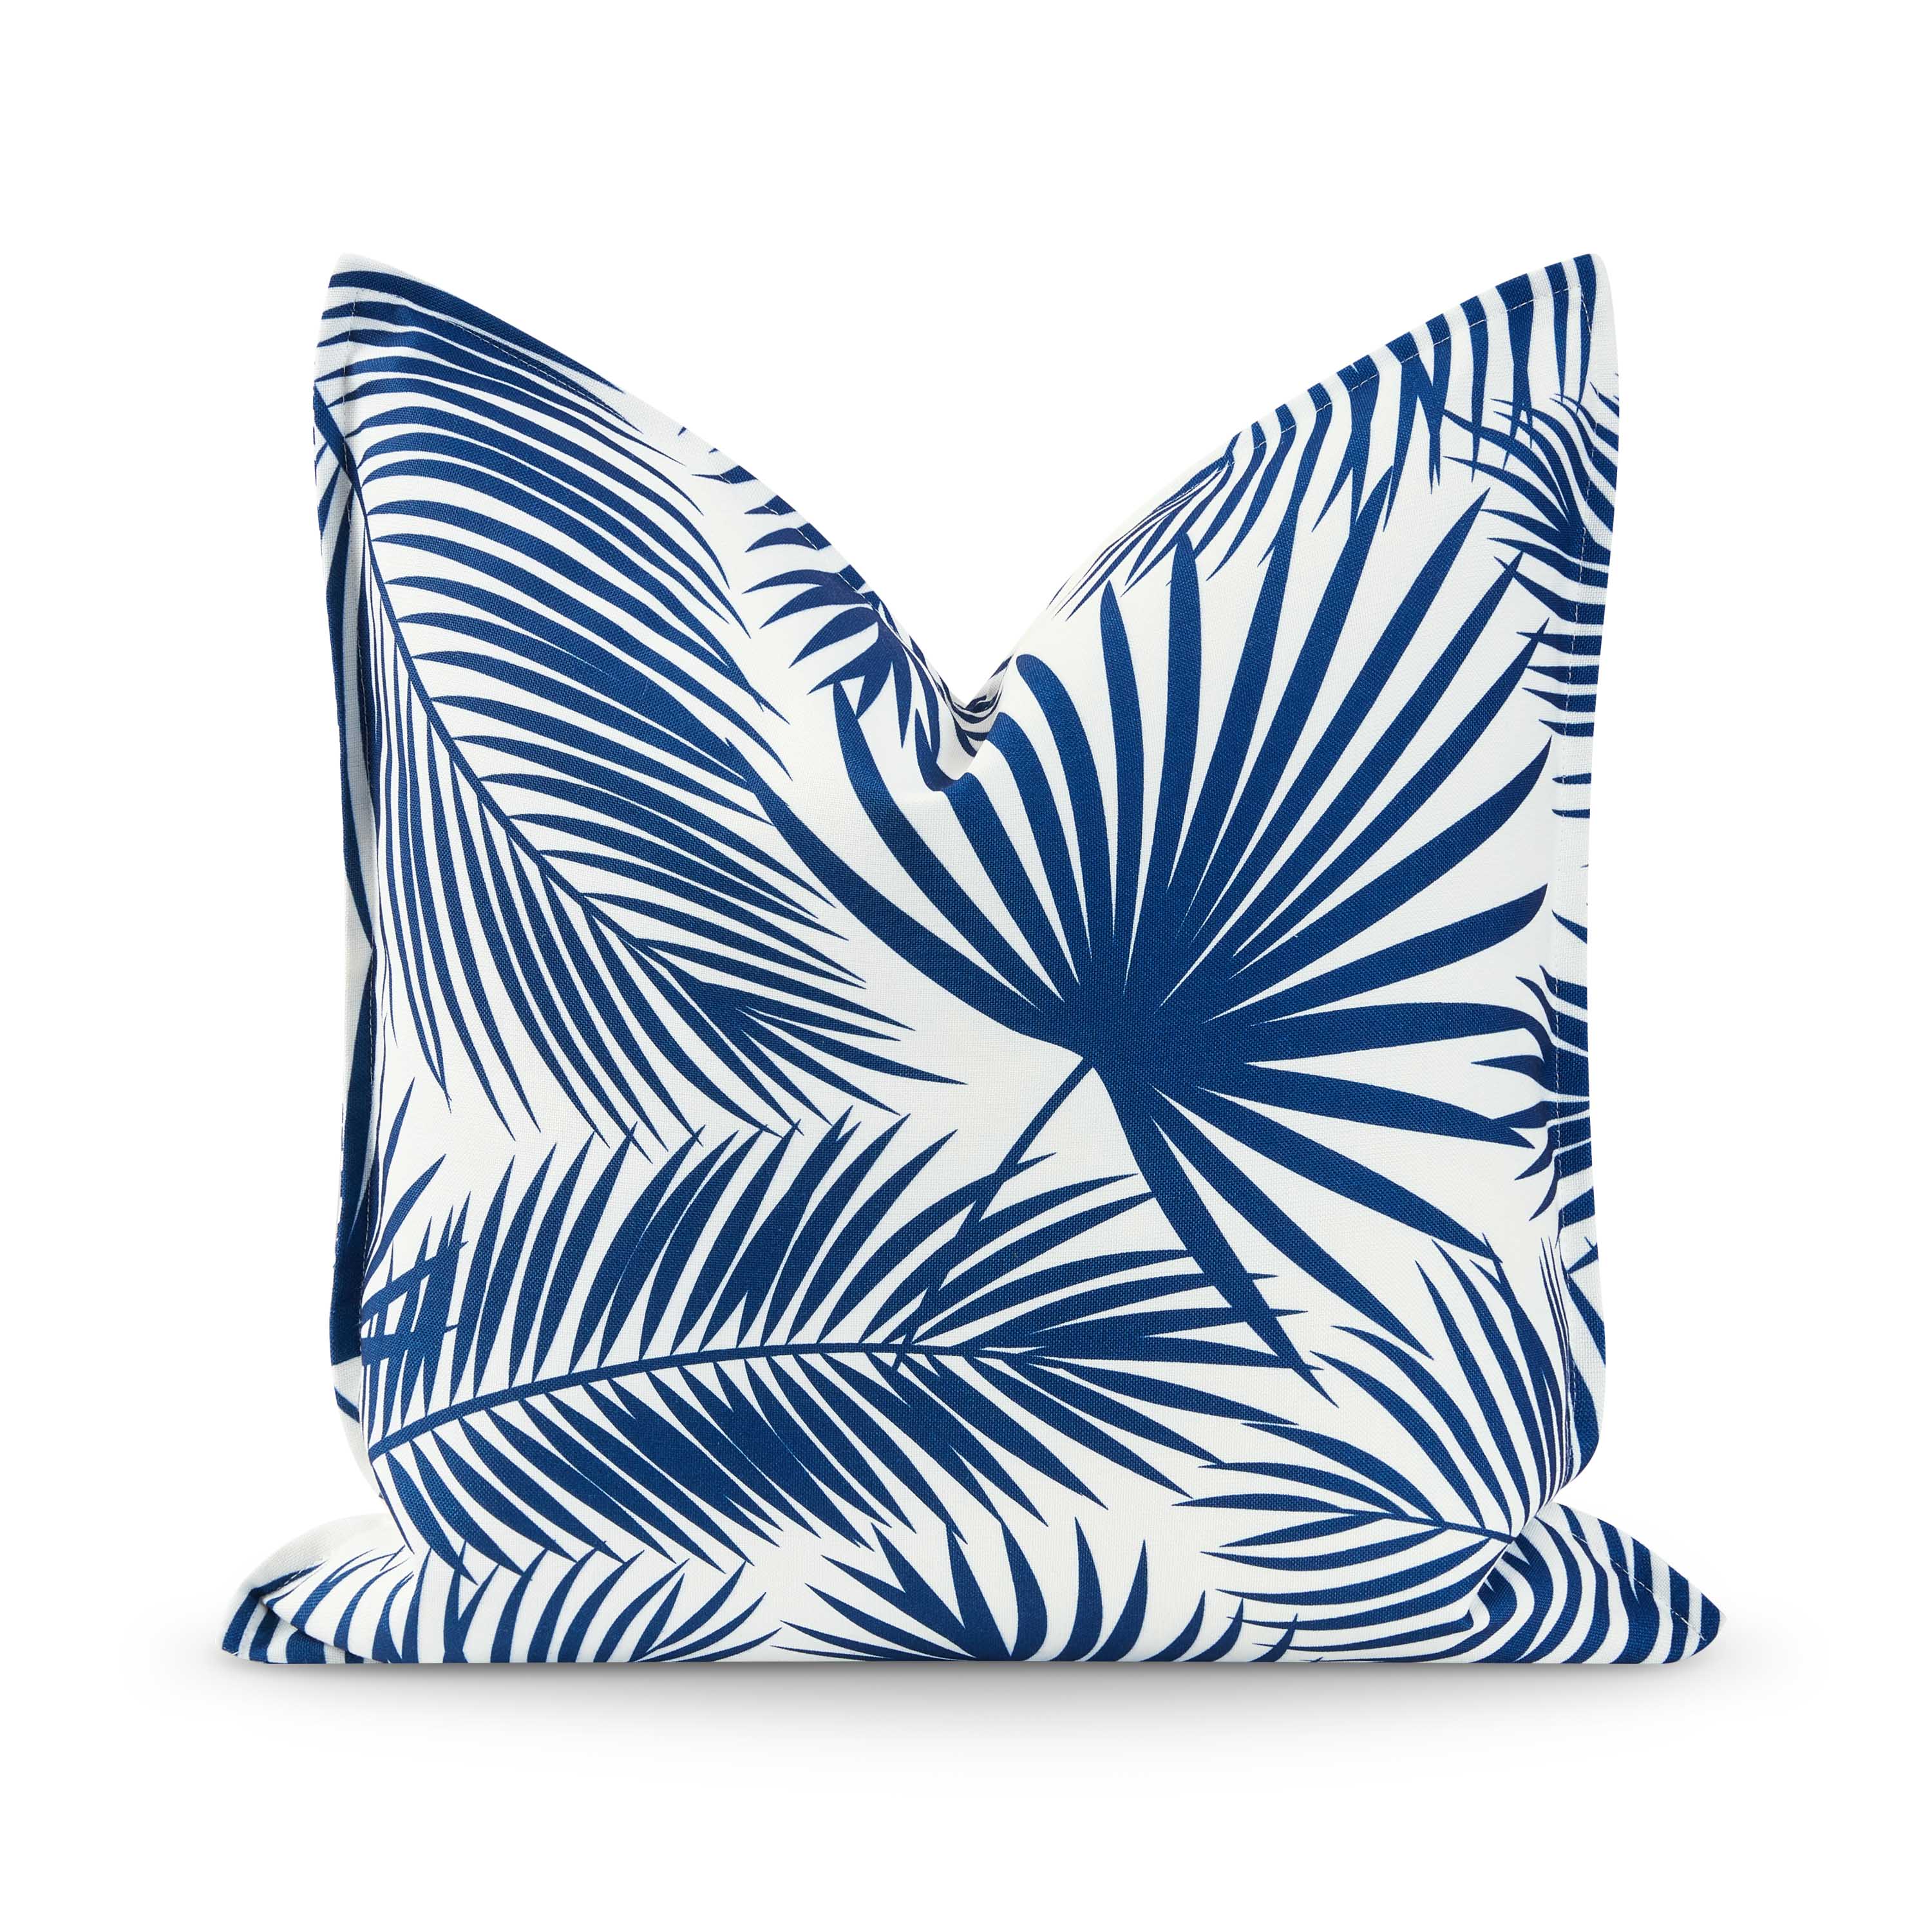 Coastal Hampton Style Indoor Outdoor Pillow Cover, Palm Leaf, Navy Blue, 20"x20"